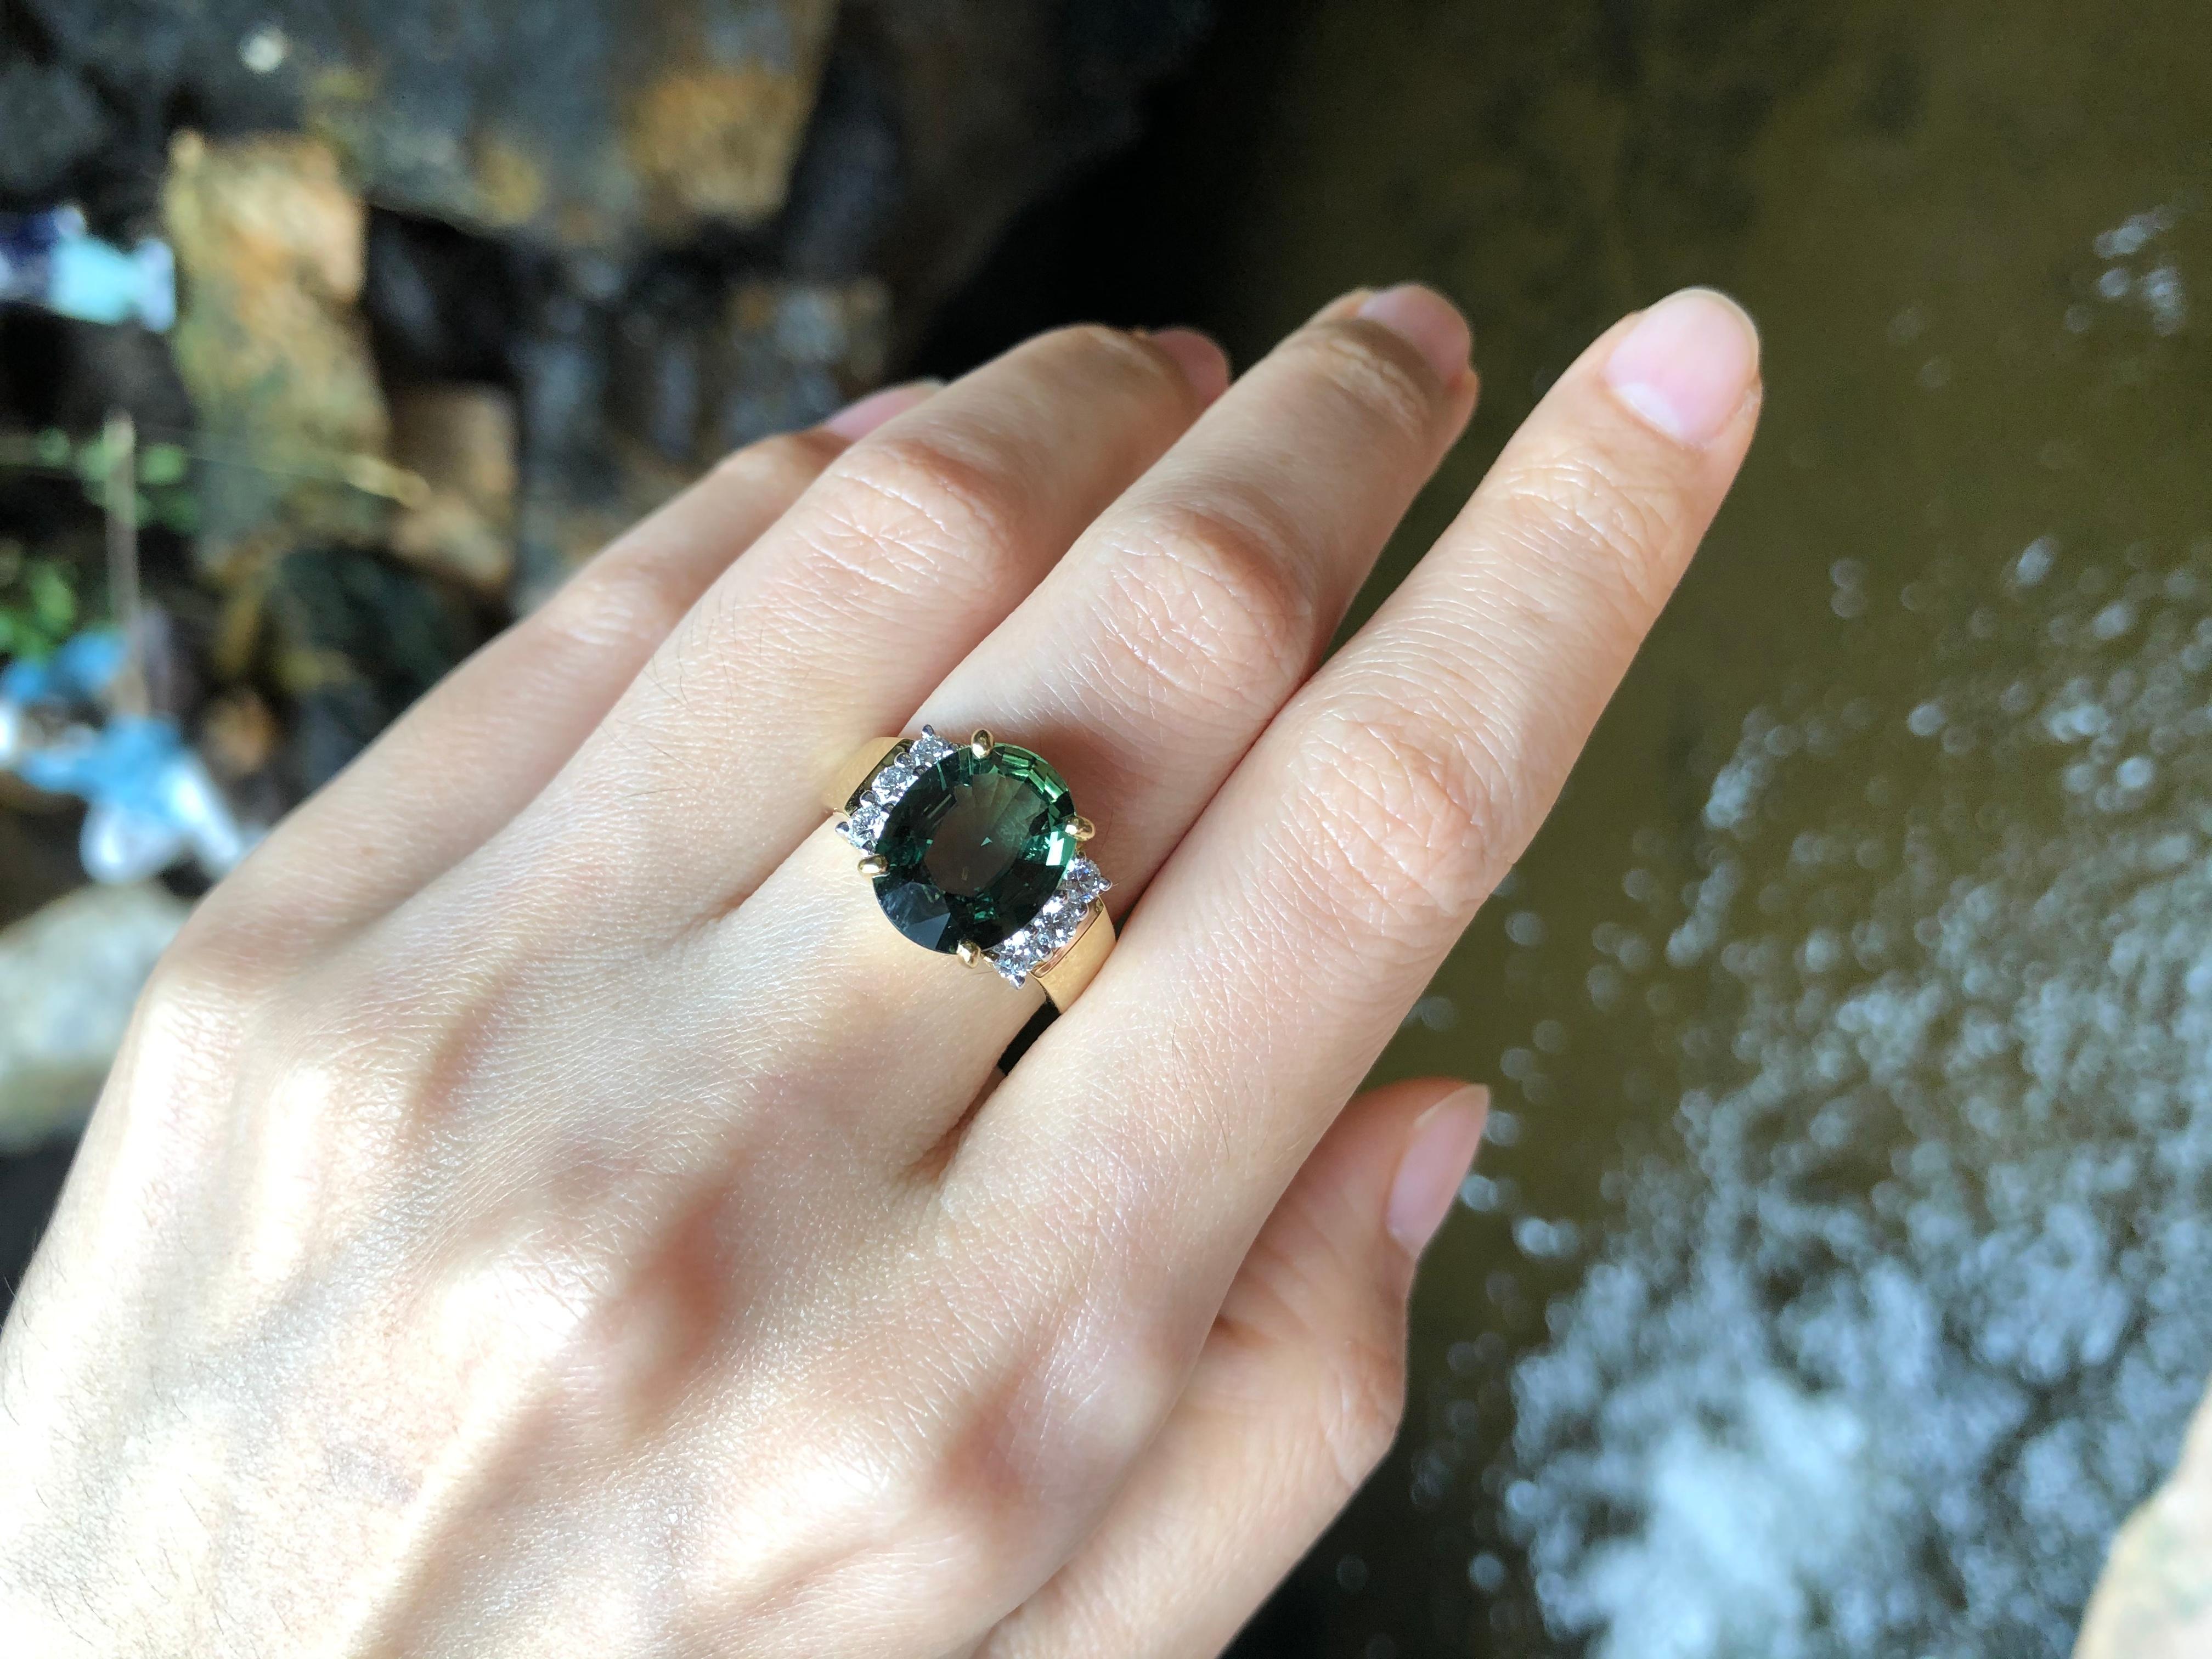 Green Sapphire 4.62 carats with Diamond 0.40 carat Ring set in 18 Karat Gold Settings

Width:  1.0 cm 
Length: 1.2 cm
Ring Size: 53
Total Weight: 9.94 grams

